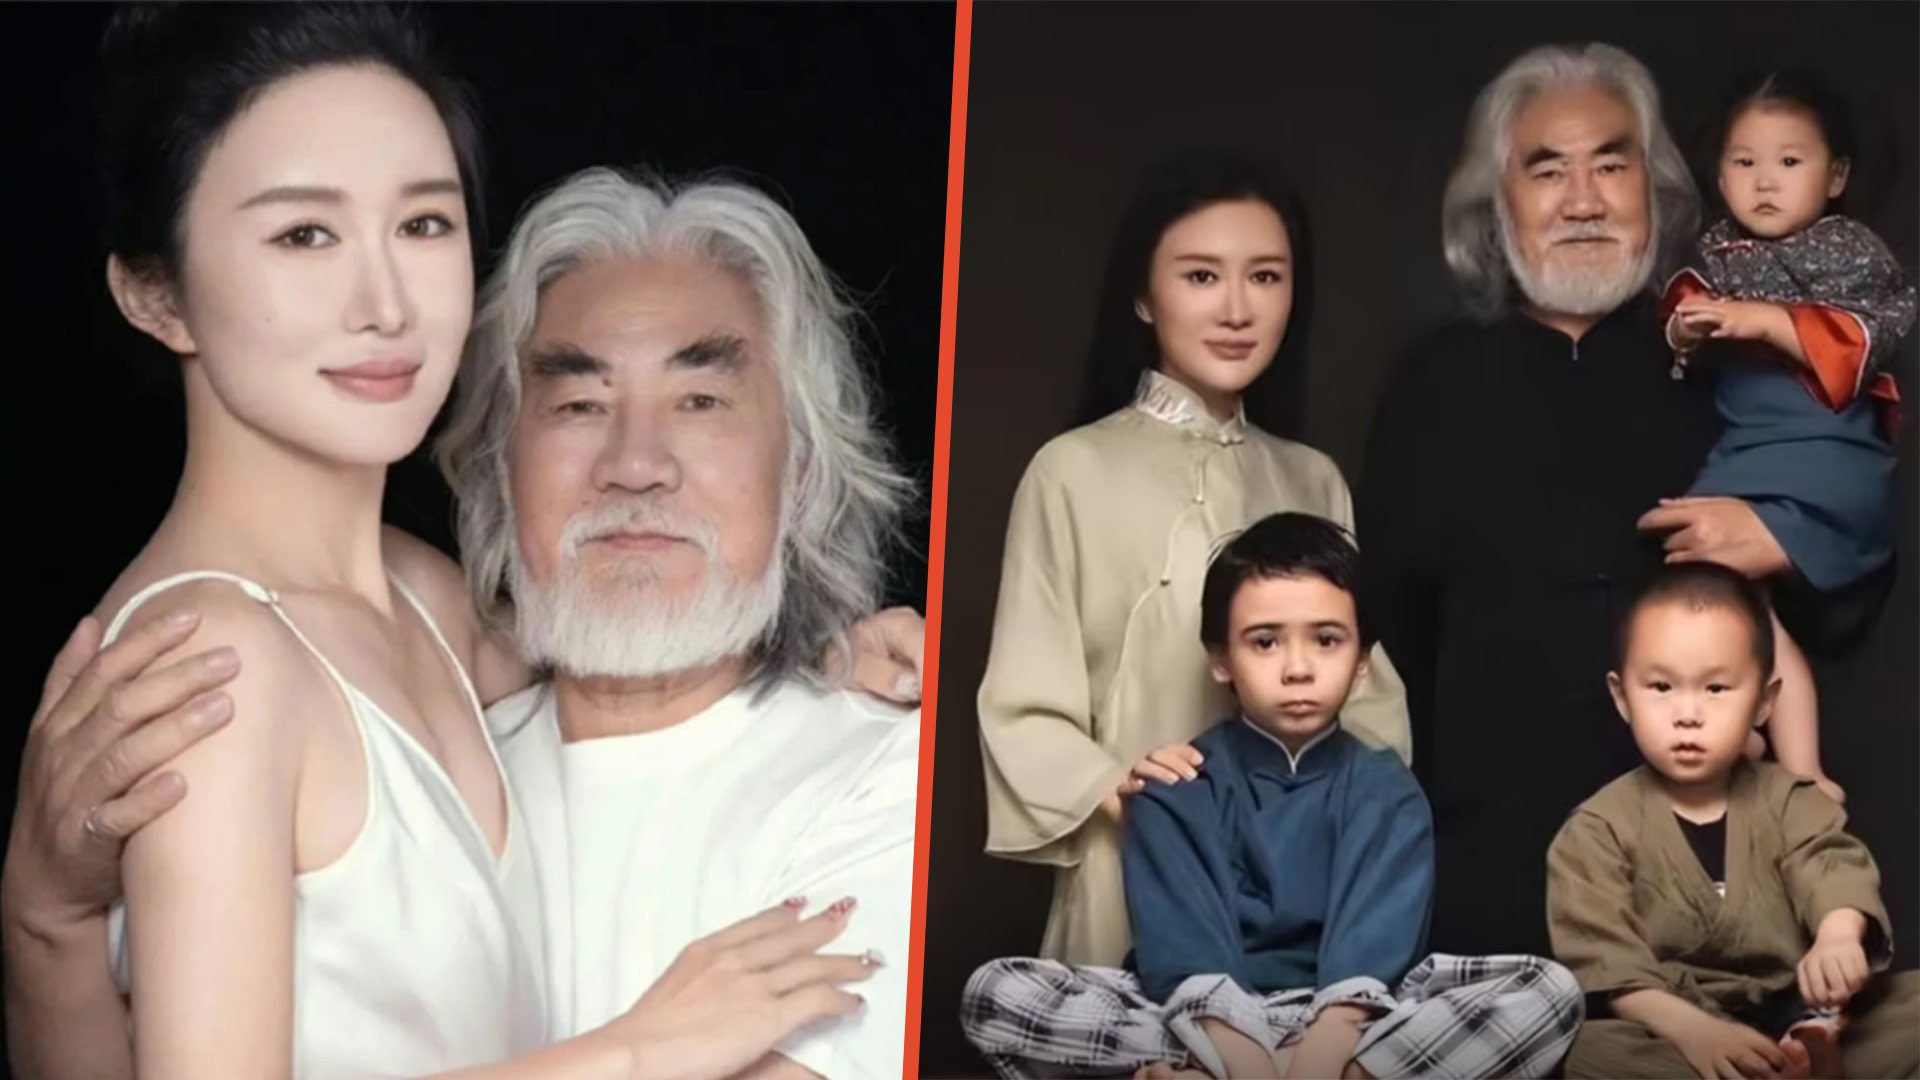 Famous China film producer, Zhang Jizhong, 72, is about to have his fifth child with his wife who is 30 years younger, and the age gap between them has sparked a social media debate. Photo: SCMP composite/Douyin